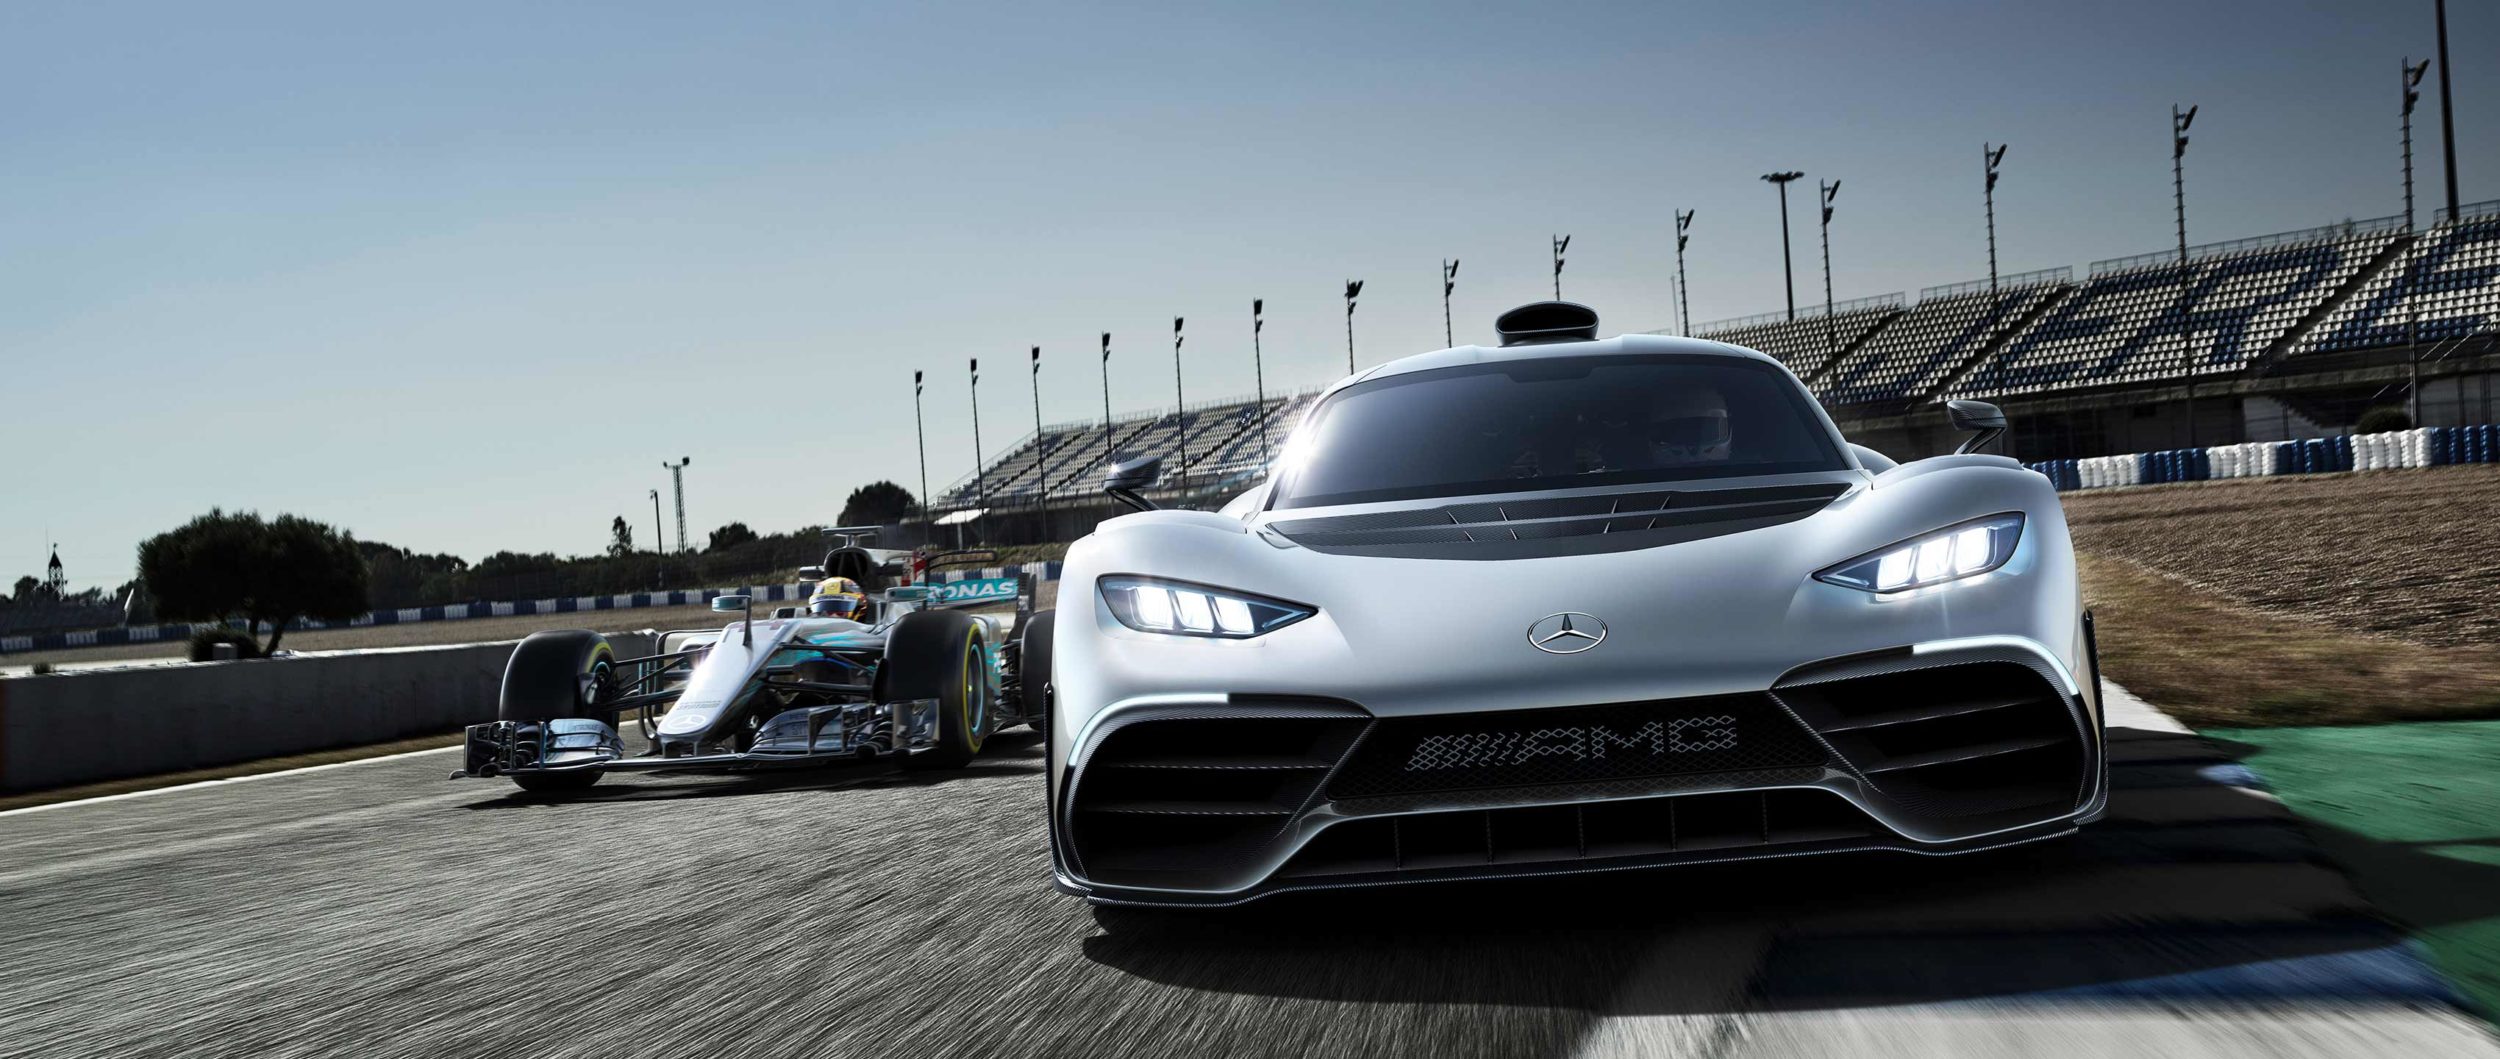 2017 Mercedes-AMG Project One